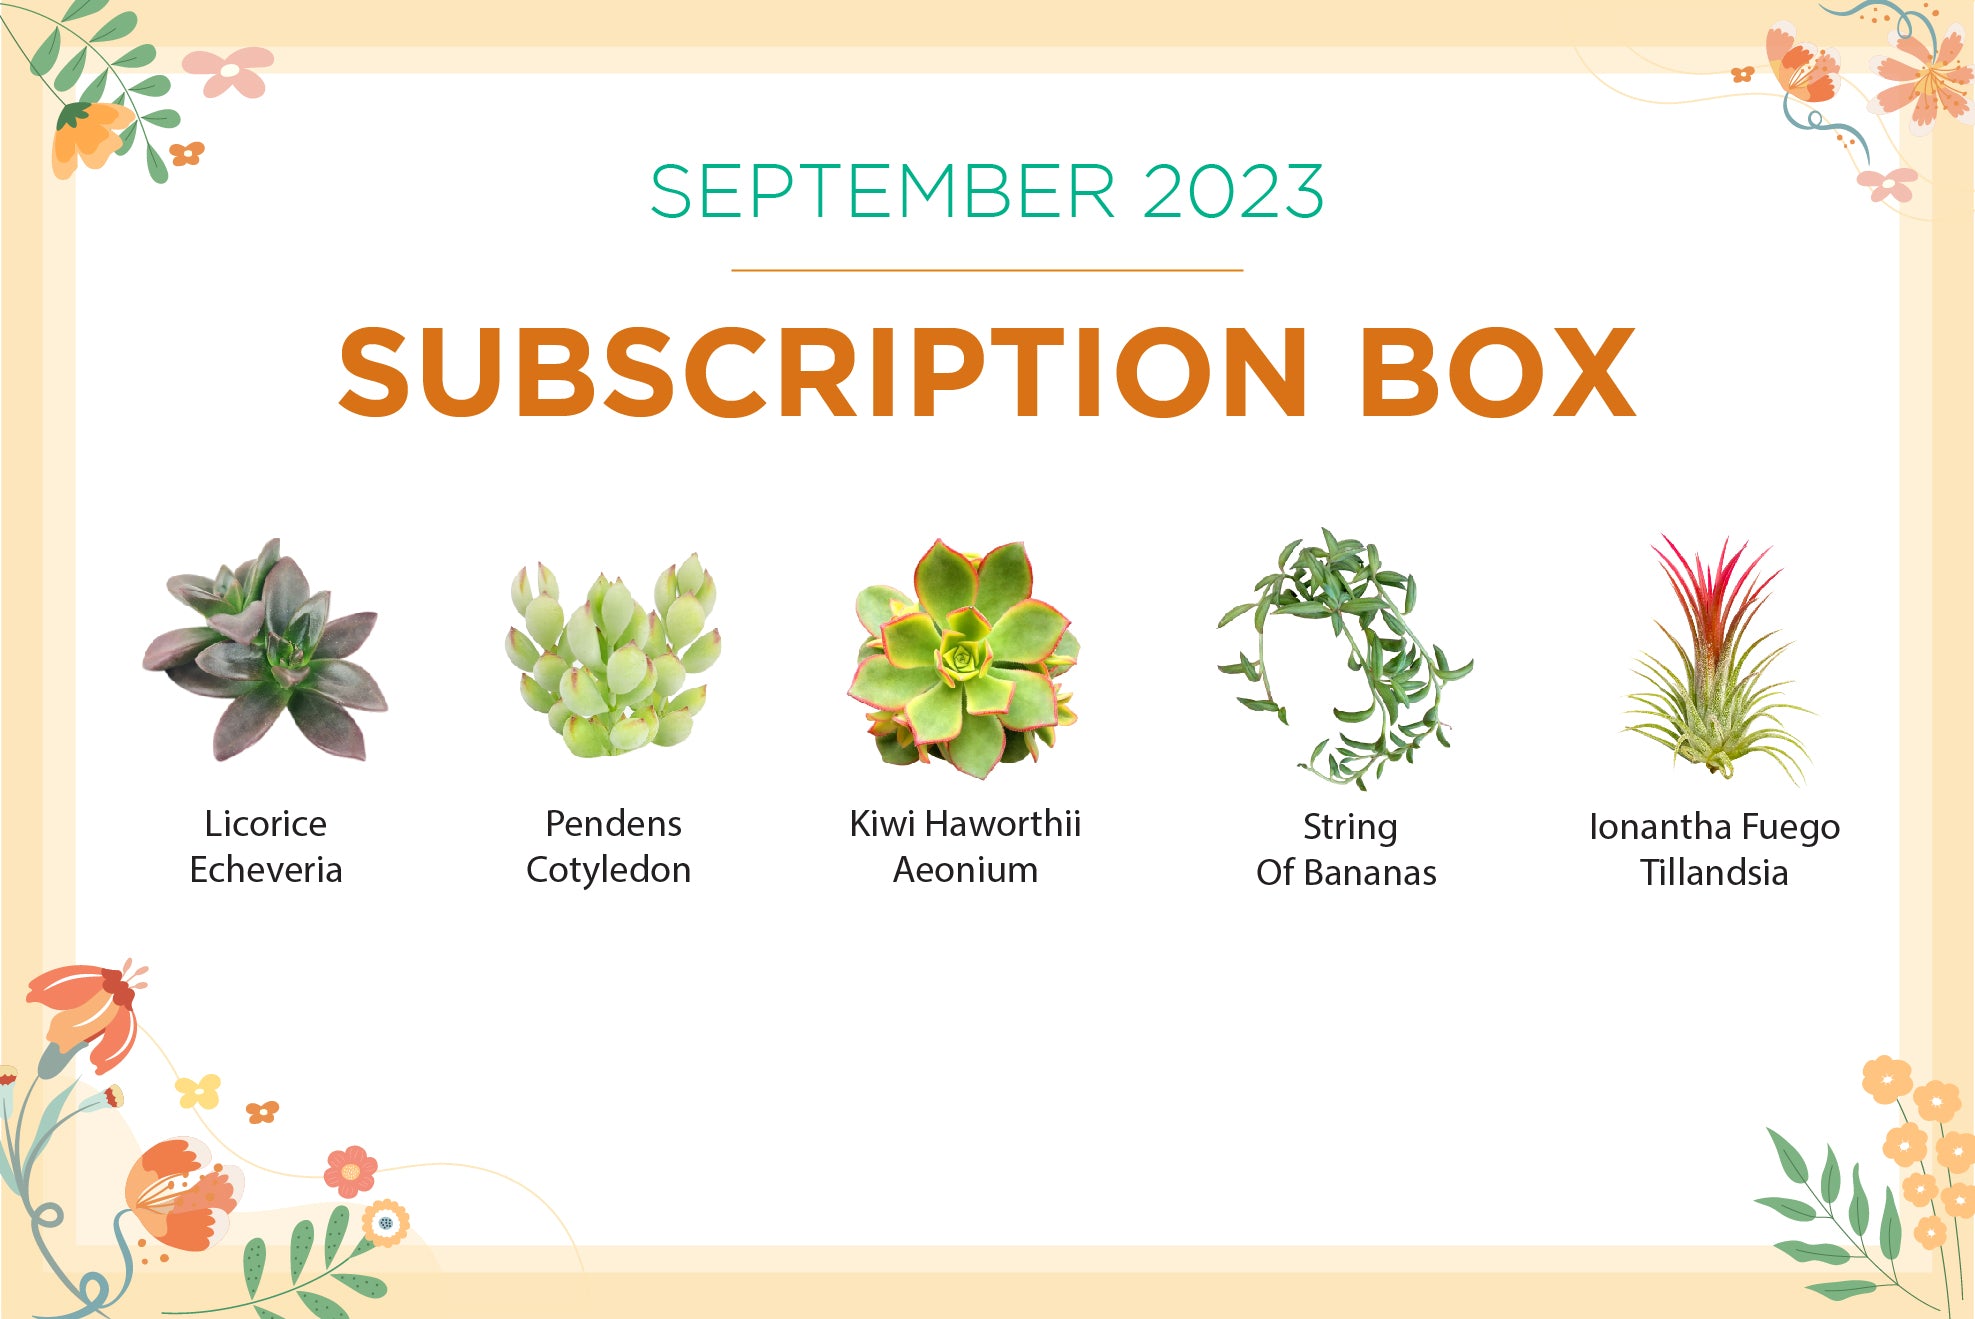 SEPTEMBER 2023 SUCCULENT SUBSCRIPTION BOX CARE GUIDE